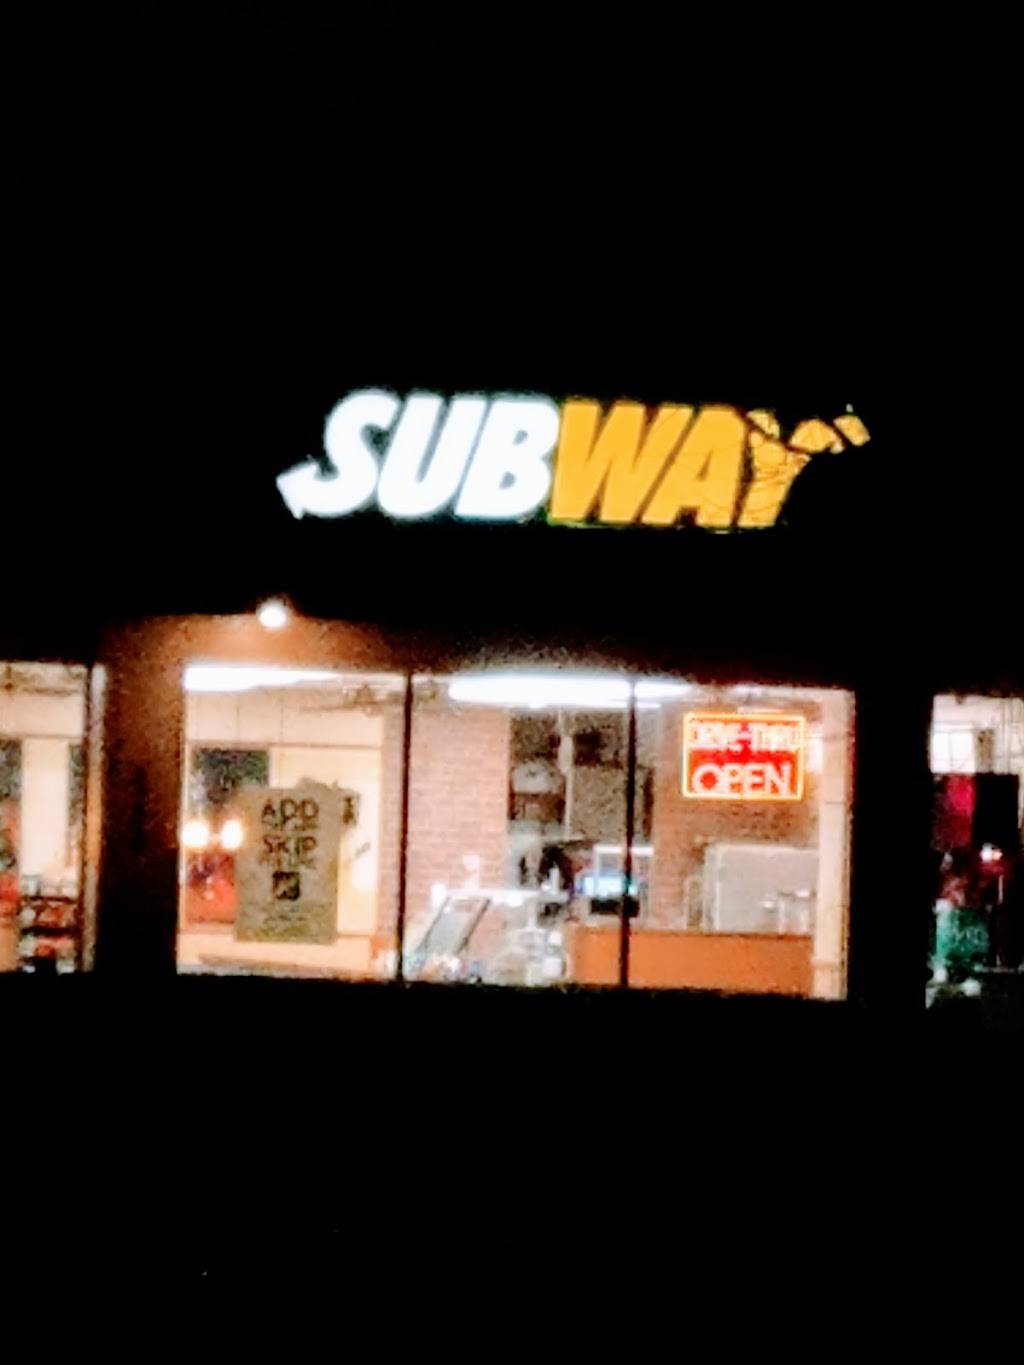 Subway | meal takeaway | 4270 Main St, Springfield, OR 97478, USA | 5417363941 OR +1 541-736-3941